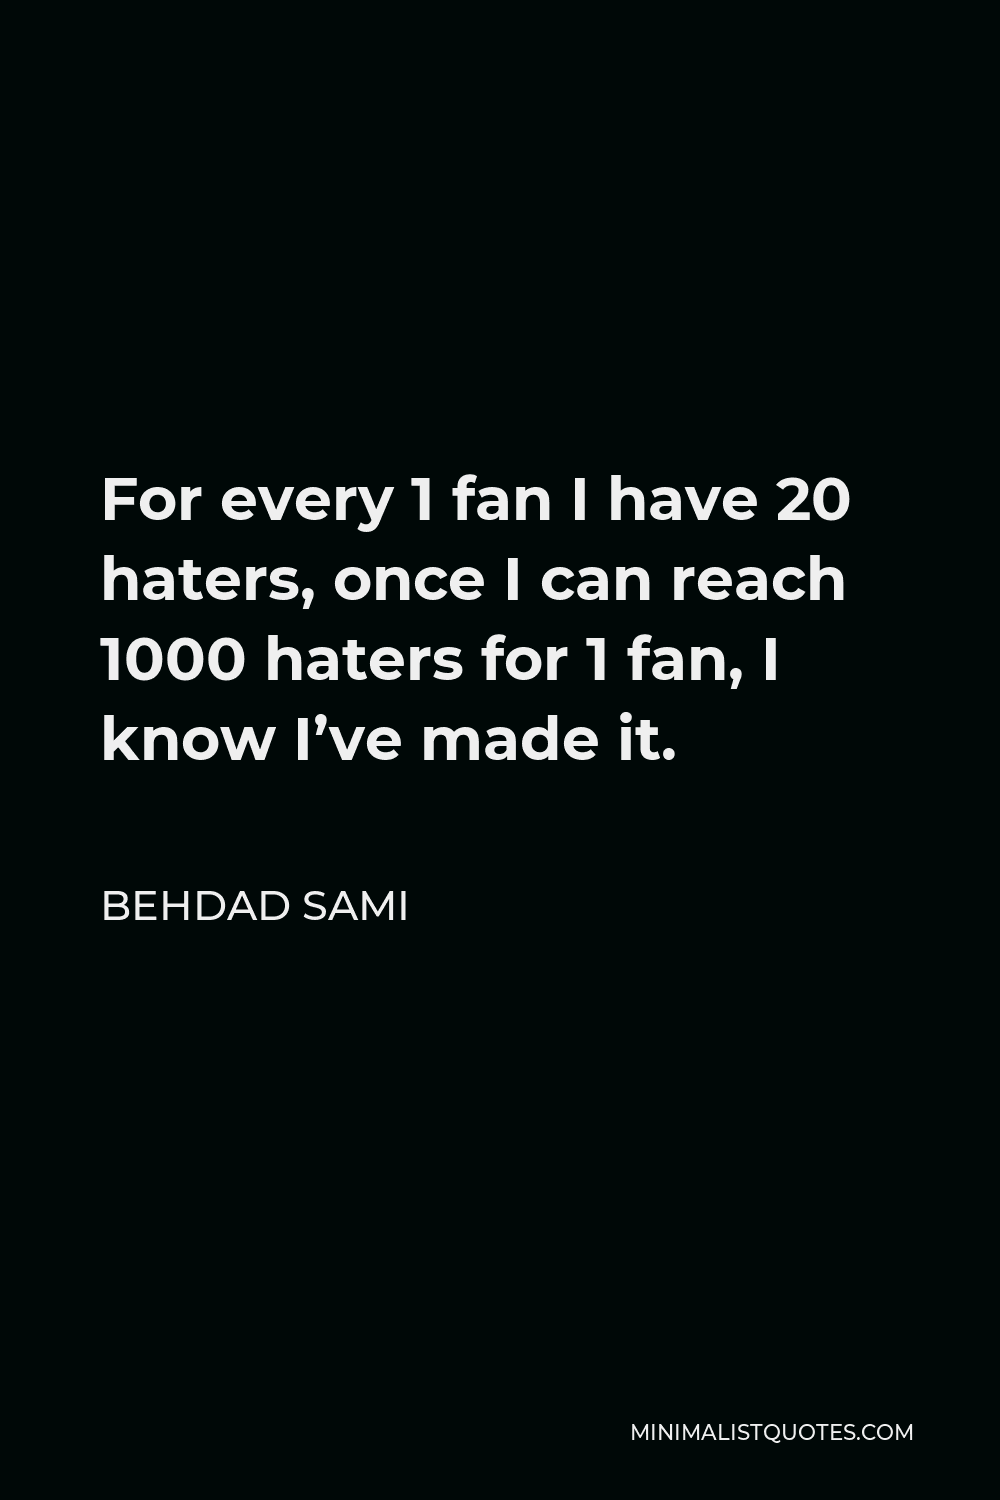 Behdad Sami Quote - For every 1 fan I have 20 haters, once I can reach 1000 haters for 1 fan, I know I’ve made it.